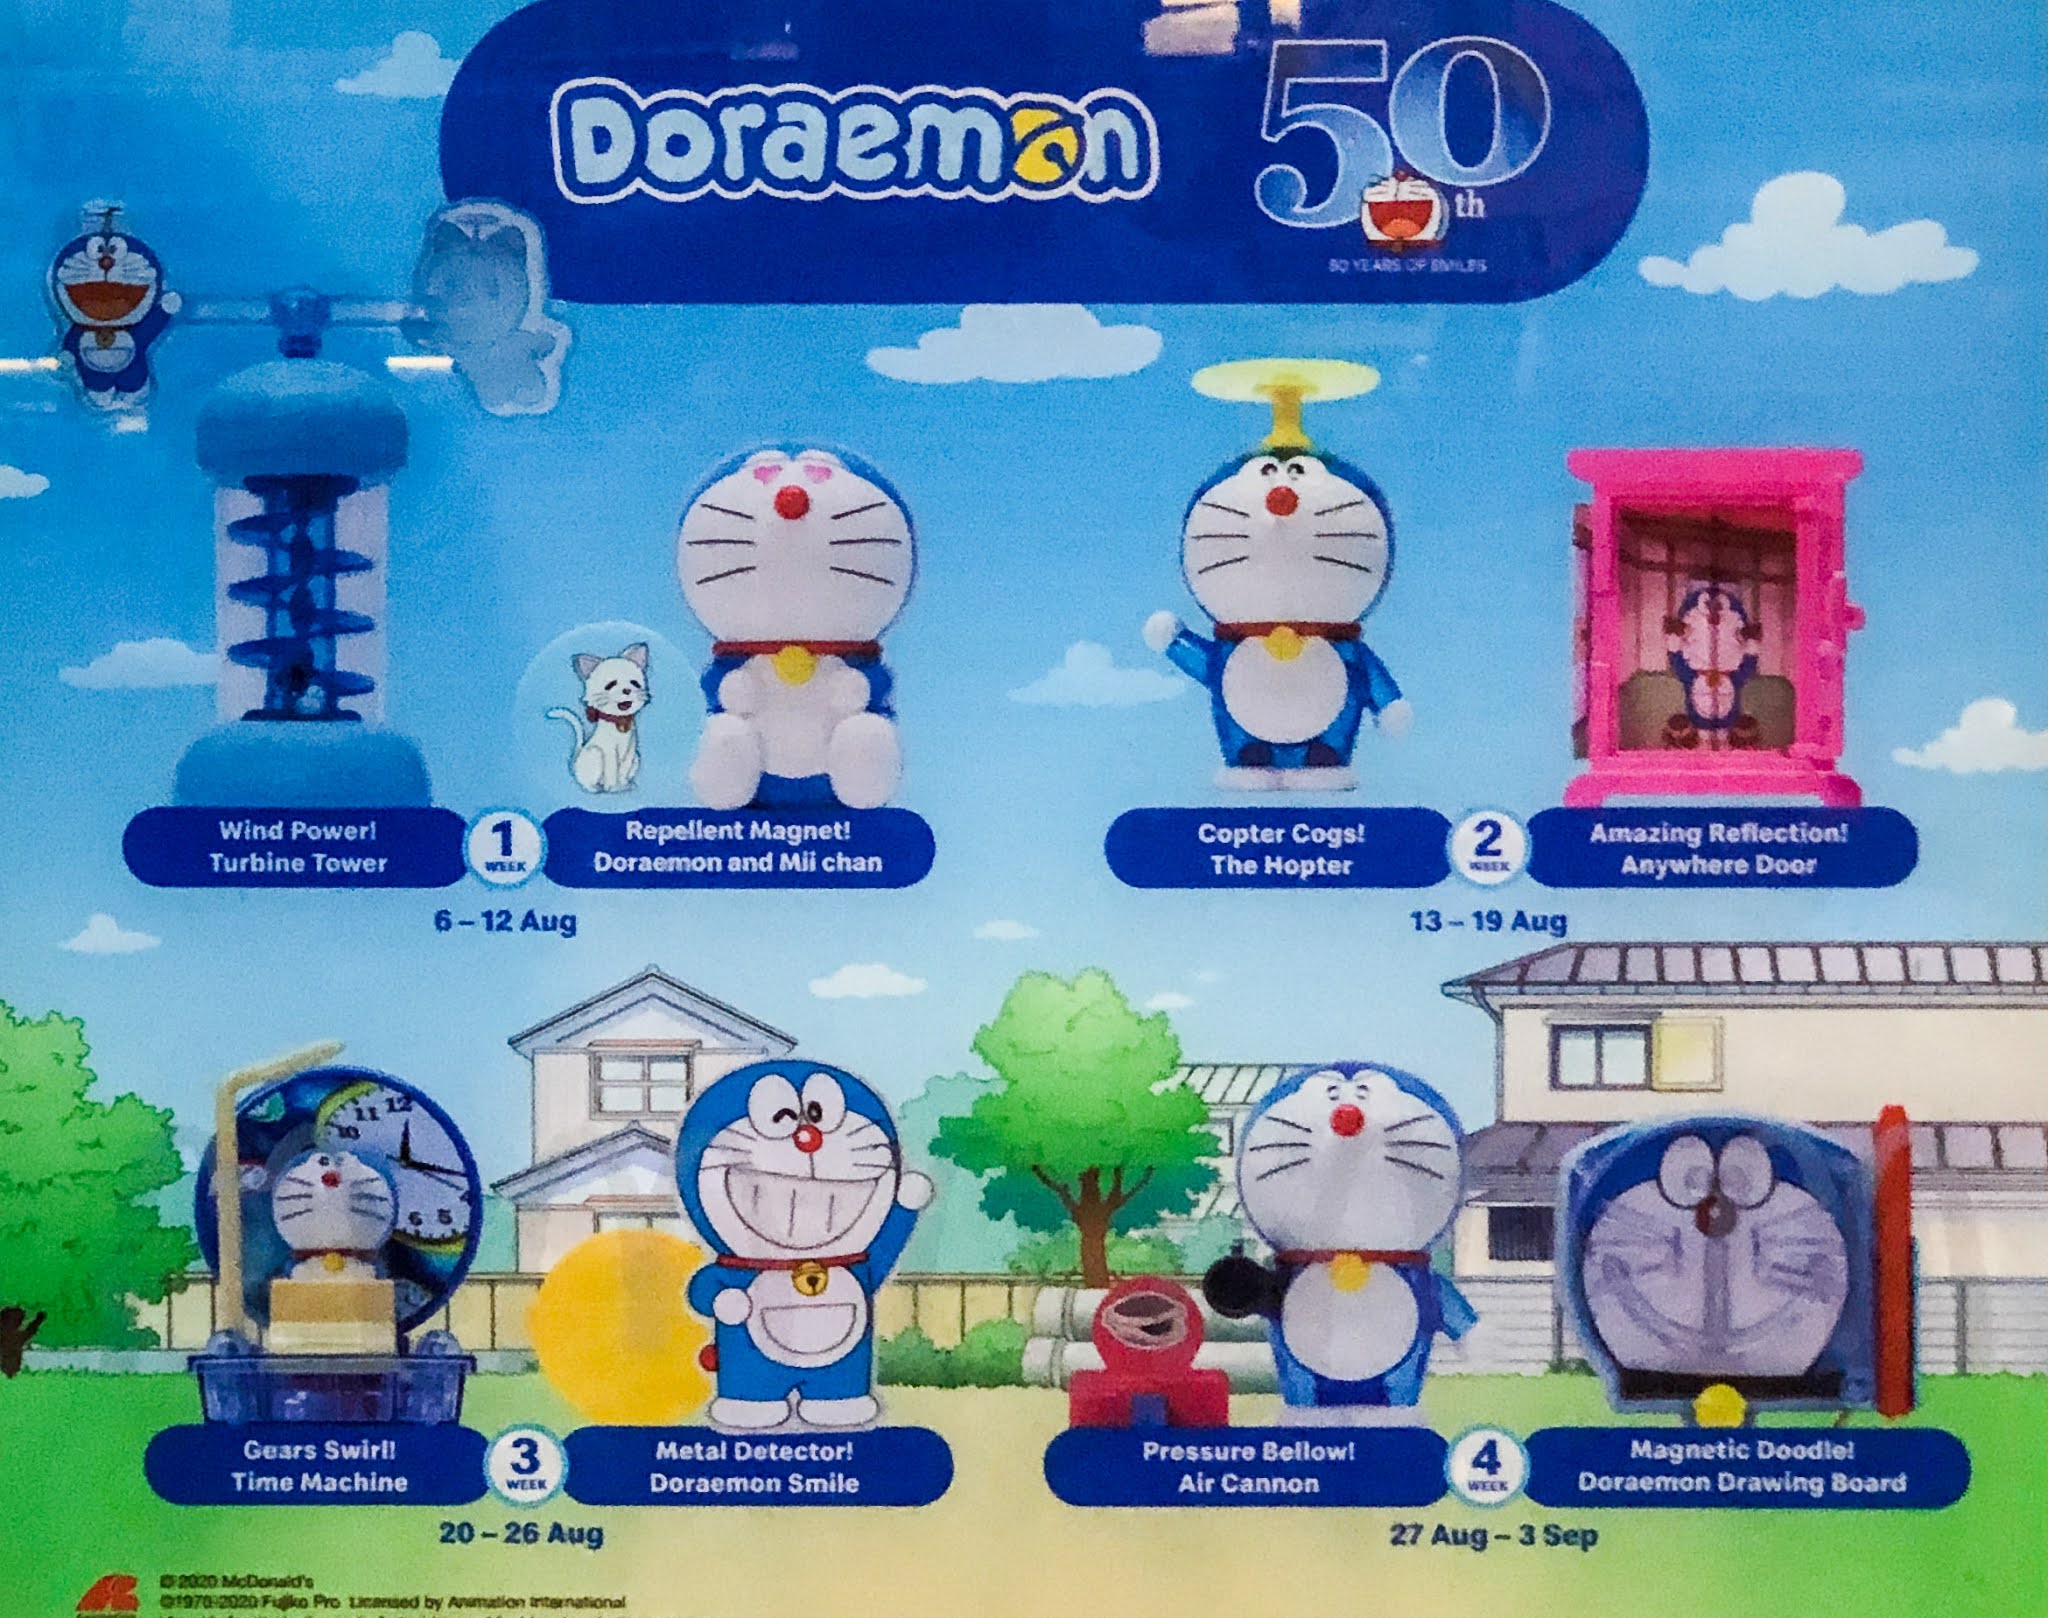 Mcdonald S Happy Meal Toy August 2020 Doraemon 50th Anniversary The Wacky Duo Singapore Family Lifestyle Travel Website